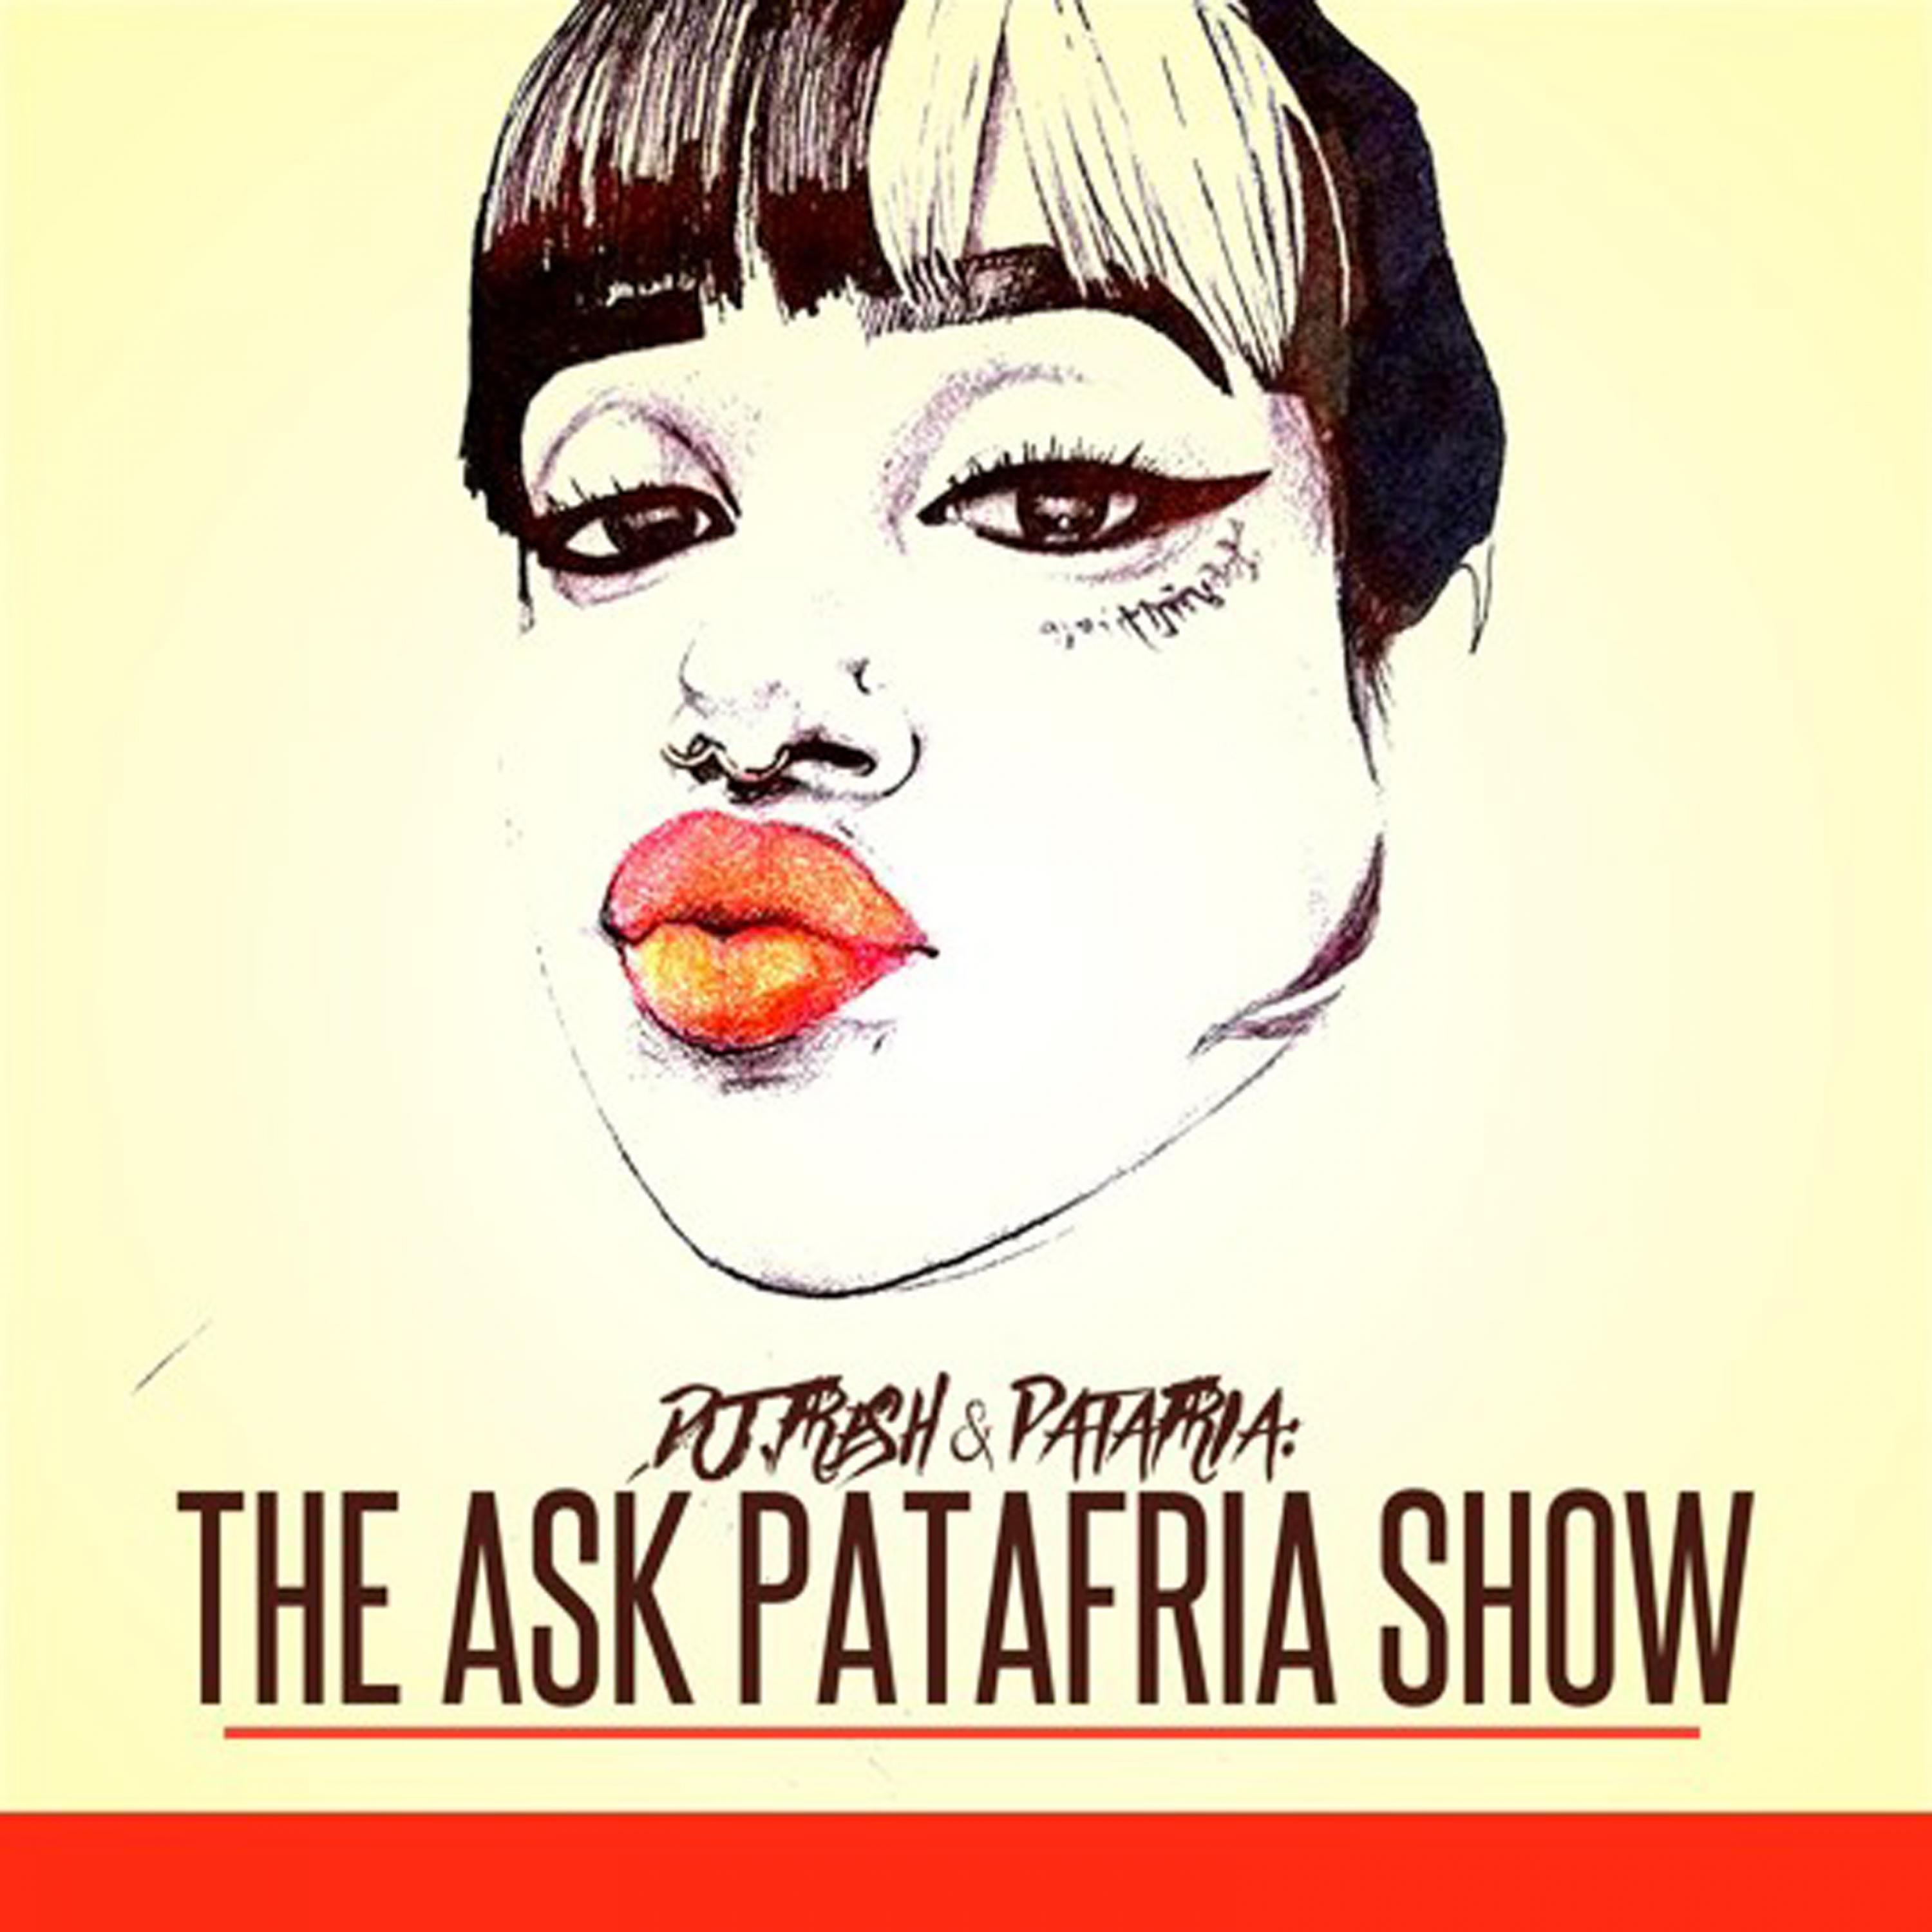 The Ask Patafria Show